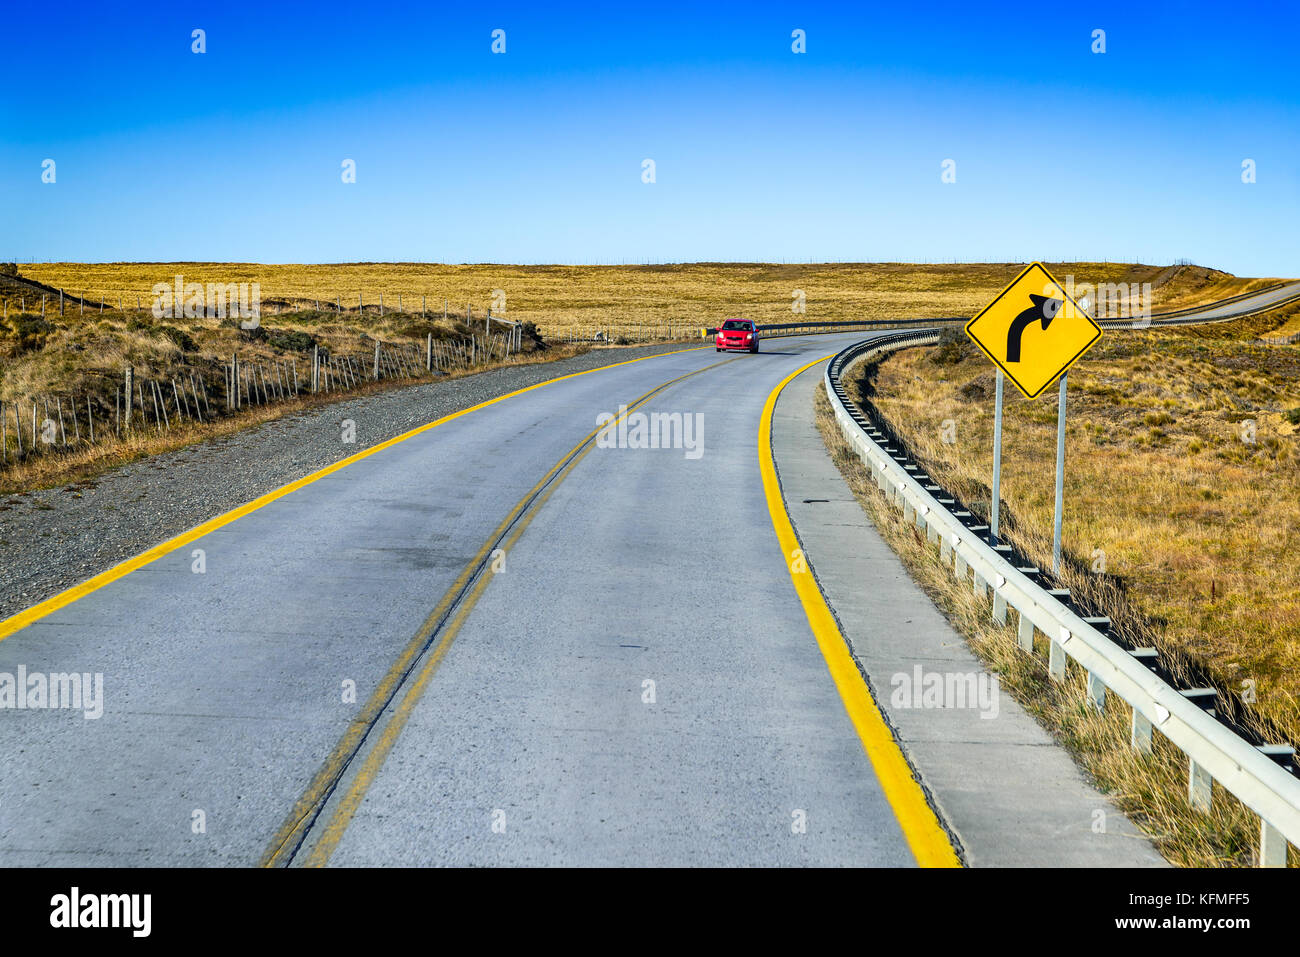 Patagonia, Chile - National road from Punta Arenas to Puerto Natales, Magallanes and Antartica Chilena region, South America. Stock Photo